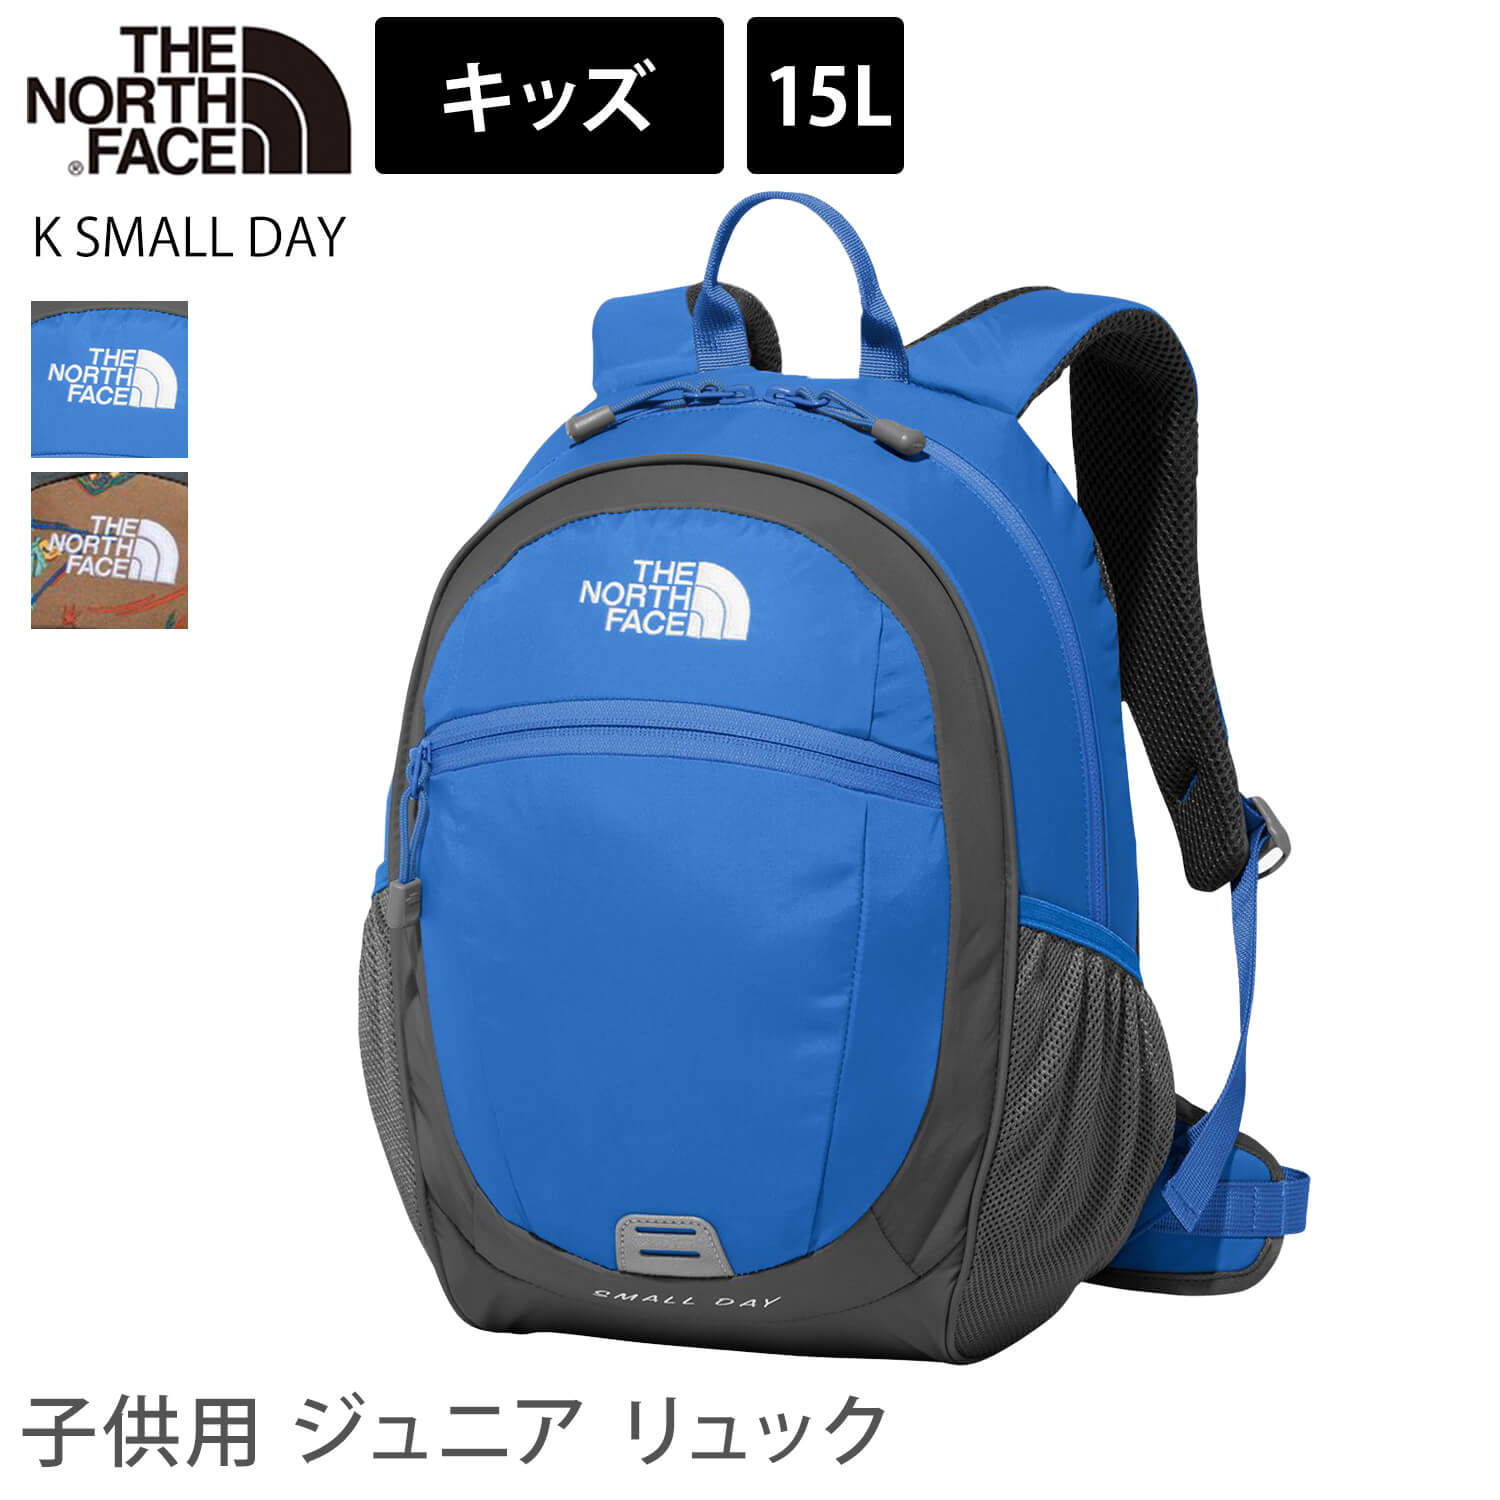 THE NORTH FACE] Kids Small Day Backpack / North Face Kids Outdoor ...